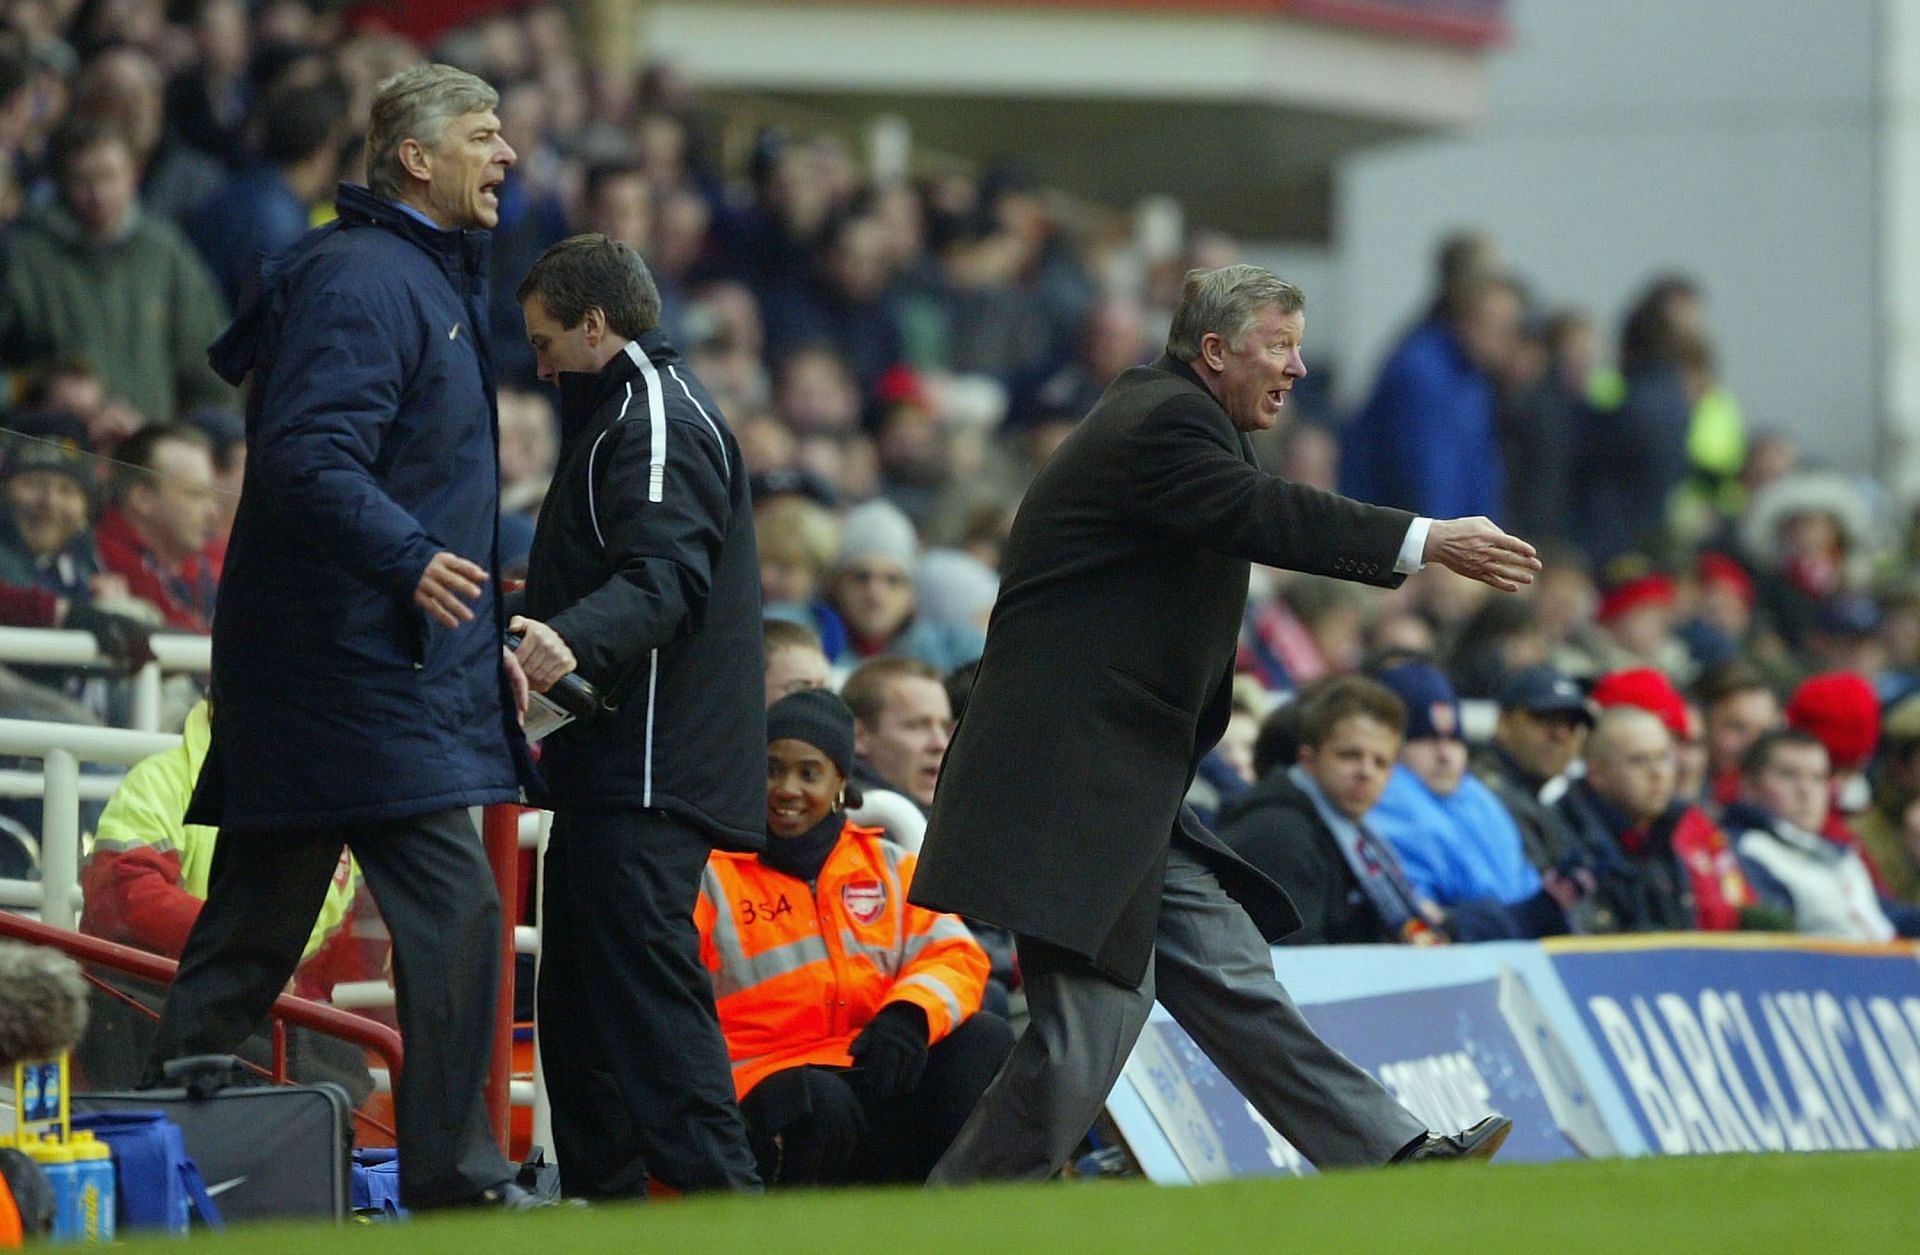 Arsene Wenger and Sir Alex Ferguson had many battles as Arsenal and Manchester United managers